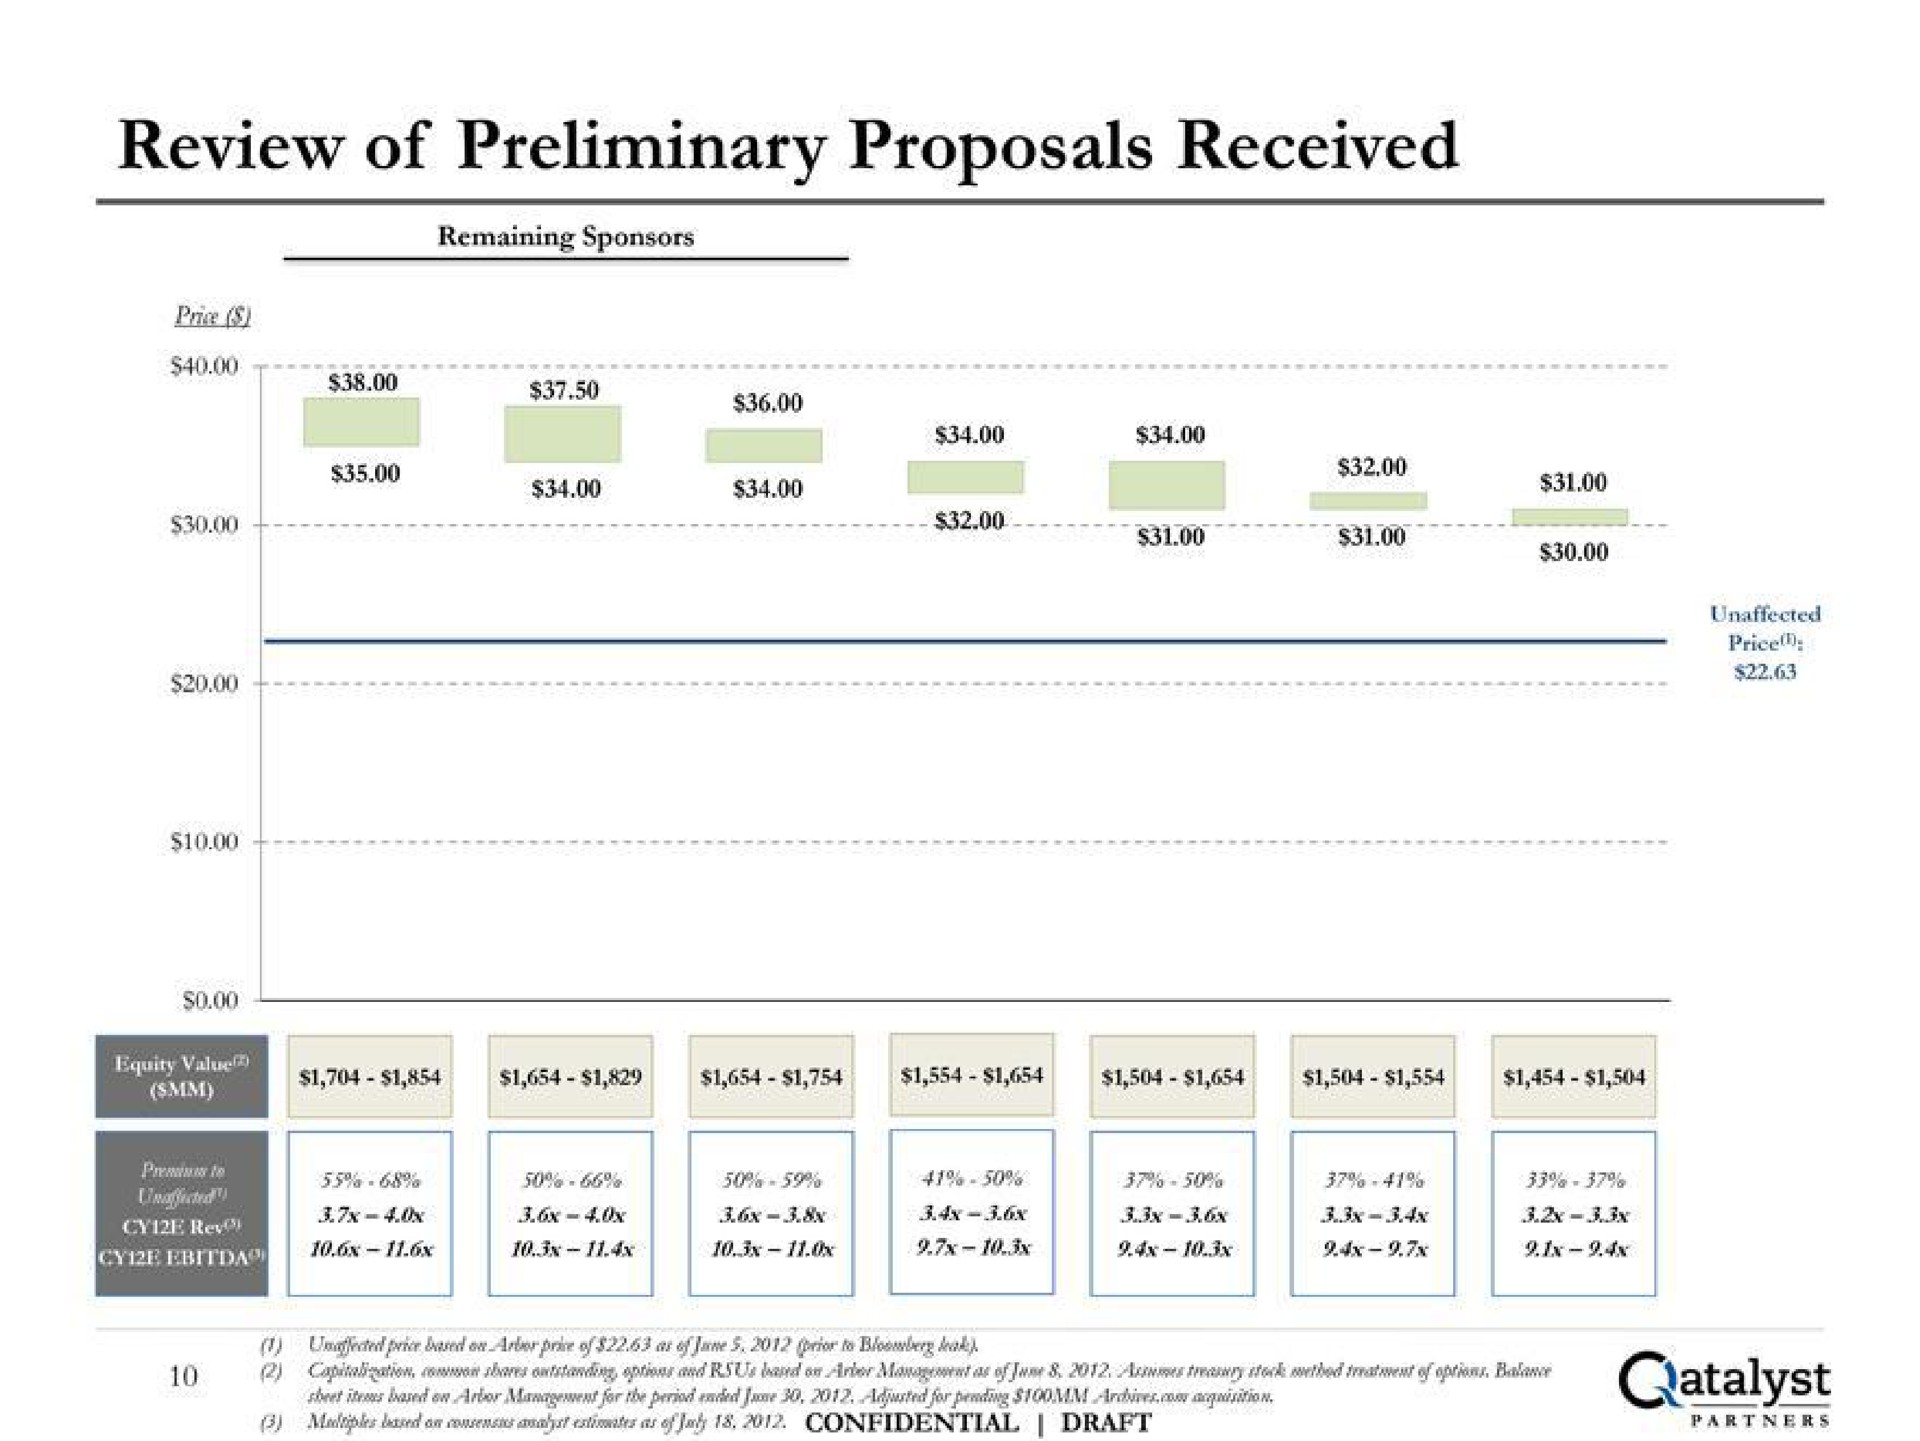 review of preliminary proposals received | Qatalyst Partners